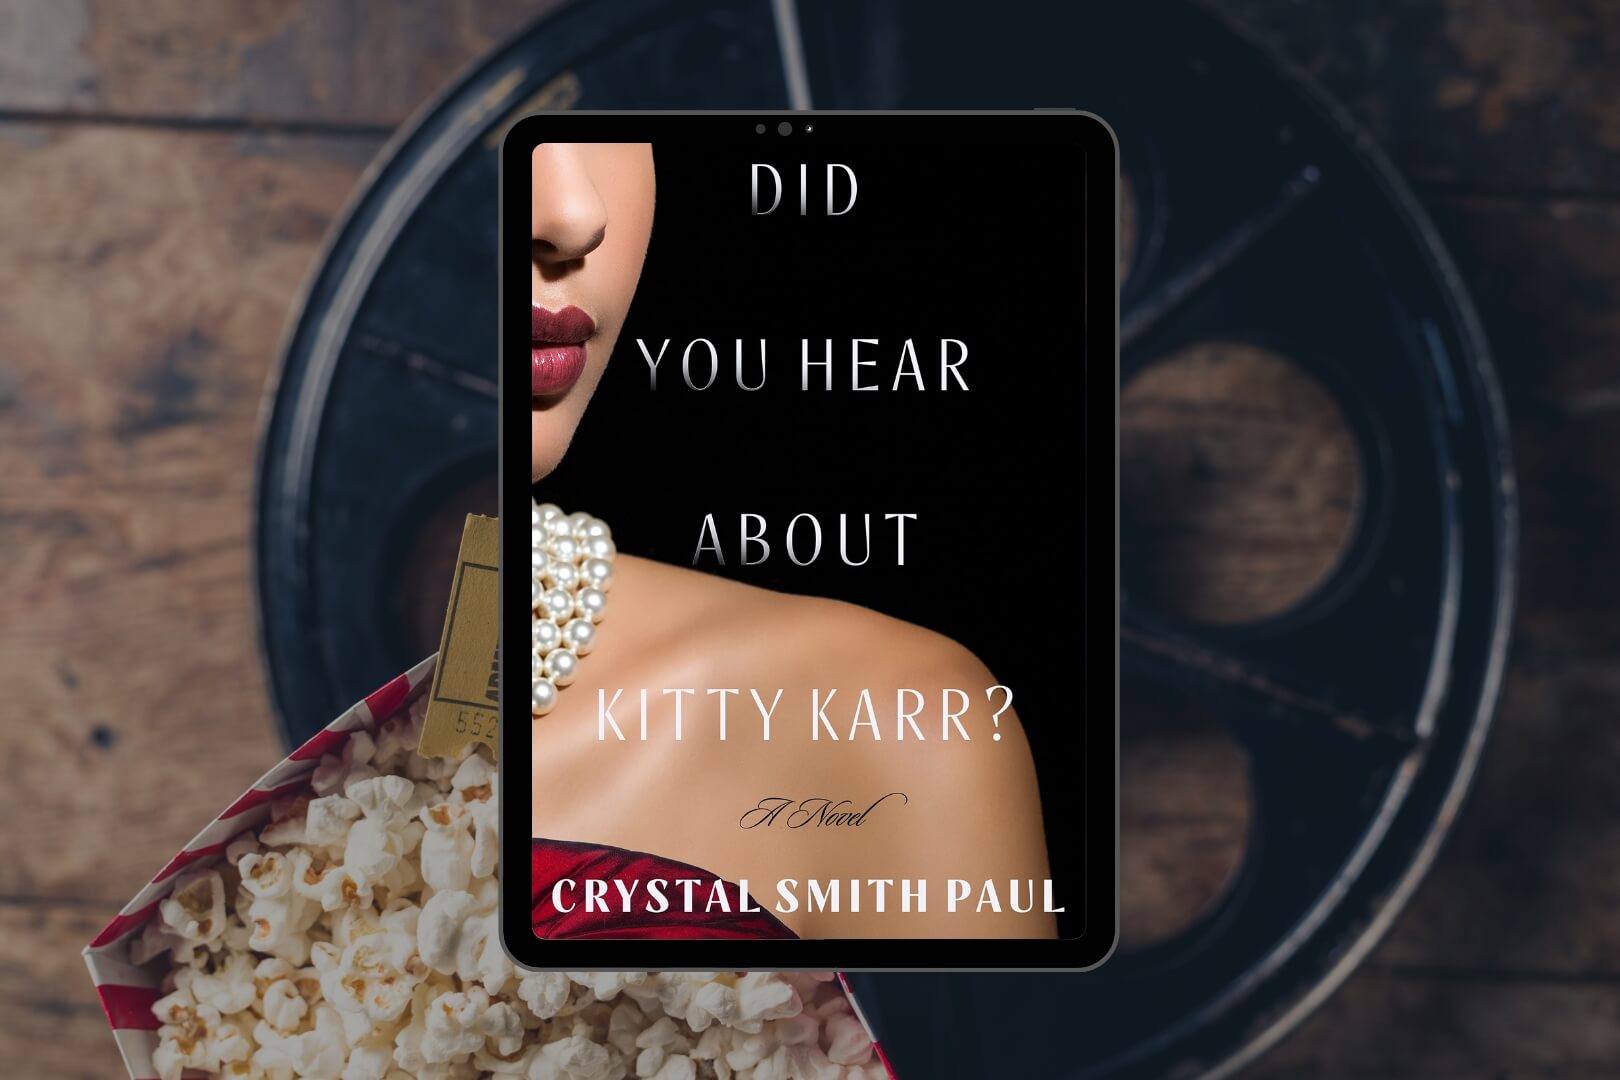 Book Club Questions for Did You Hear About Kitty Karr? by Crystal Smith Paul